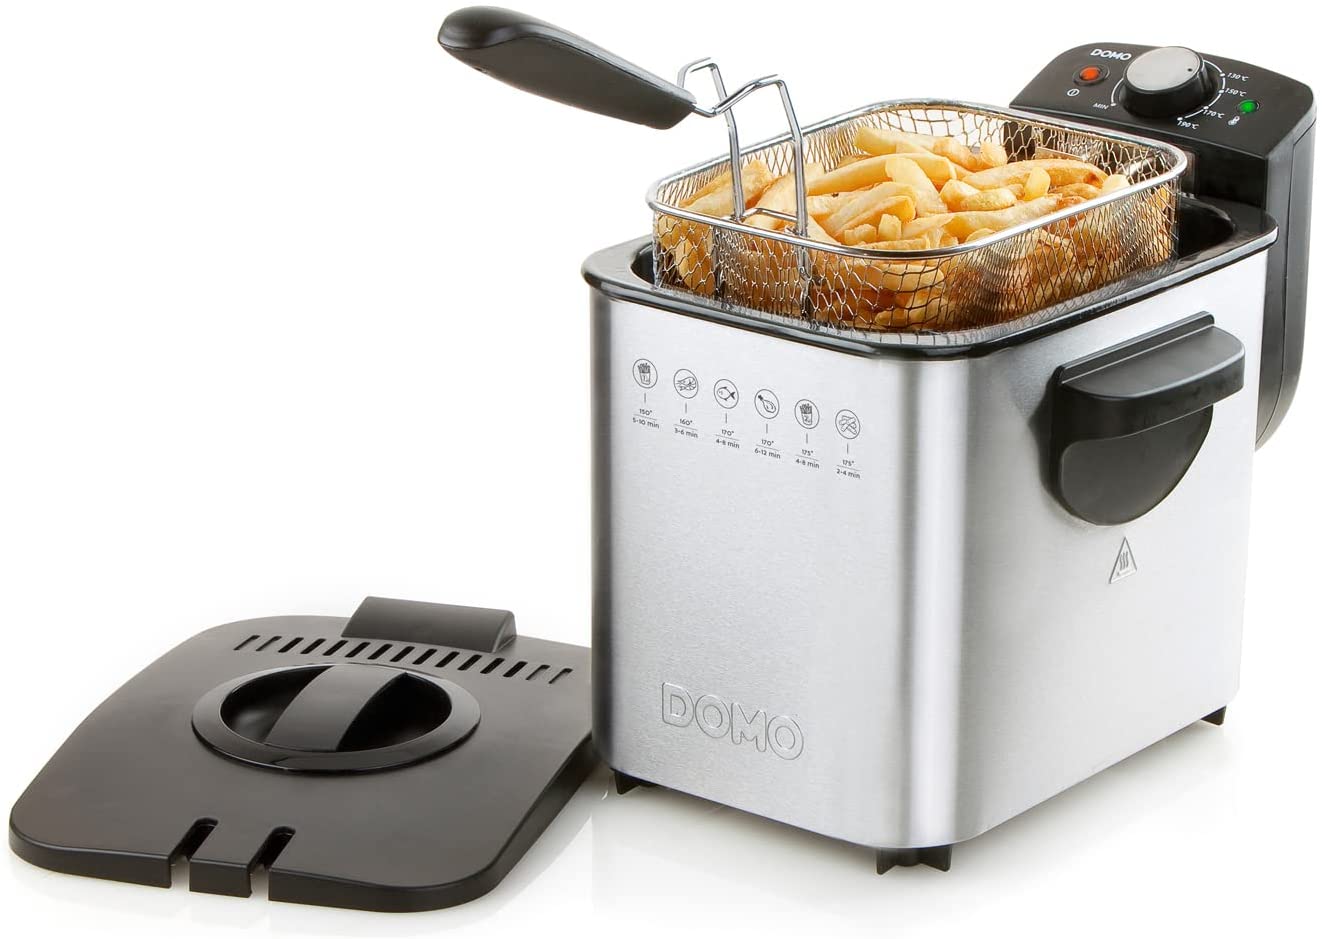 Domo Stainless Steel Fryer with Cold Zone, 4 Litre, Lid with Filter